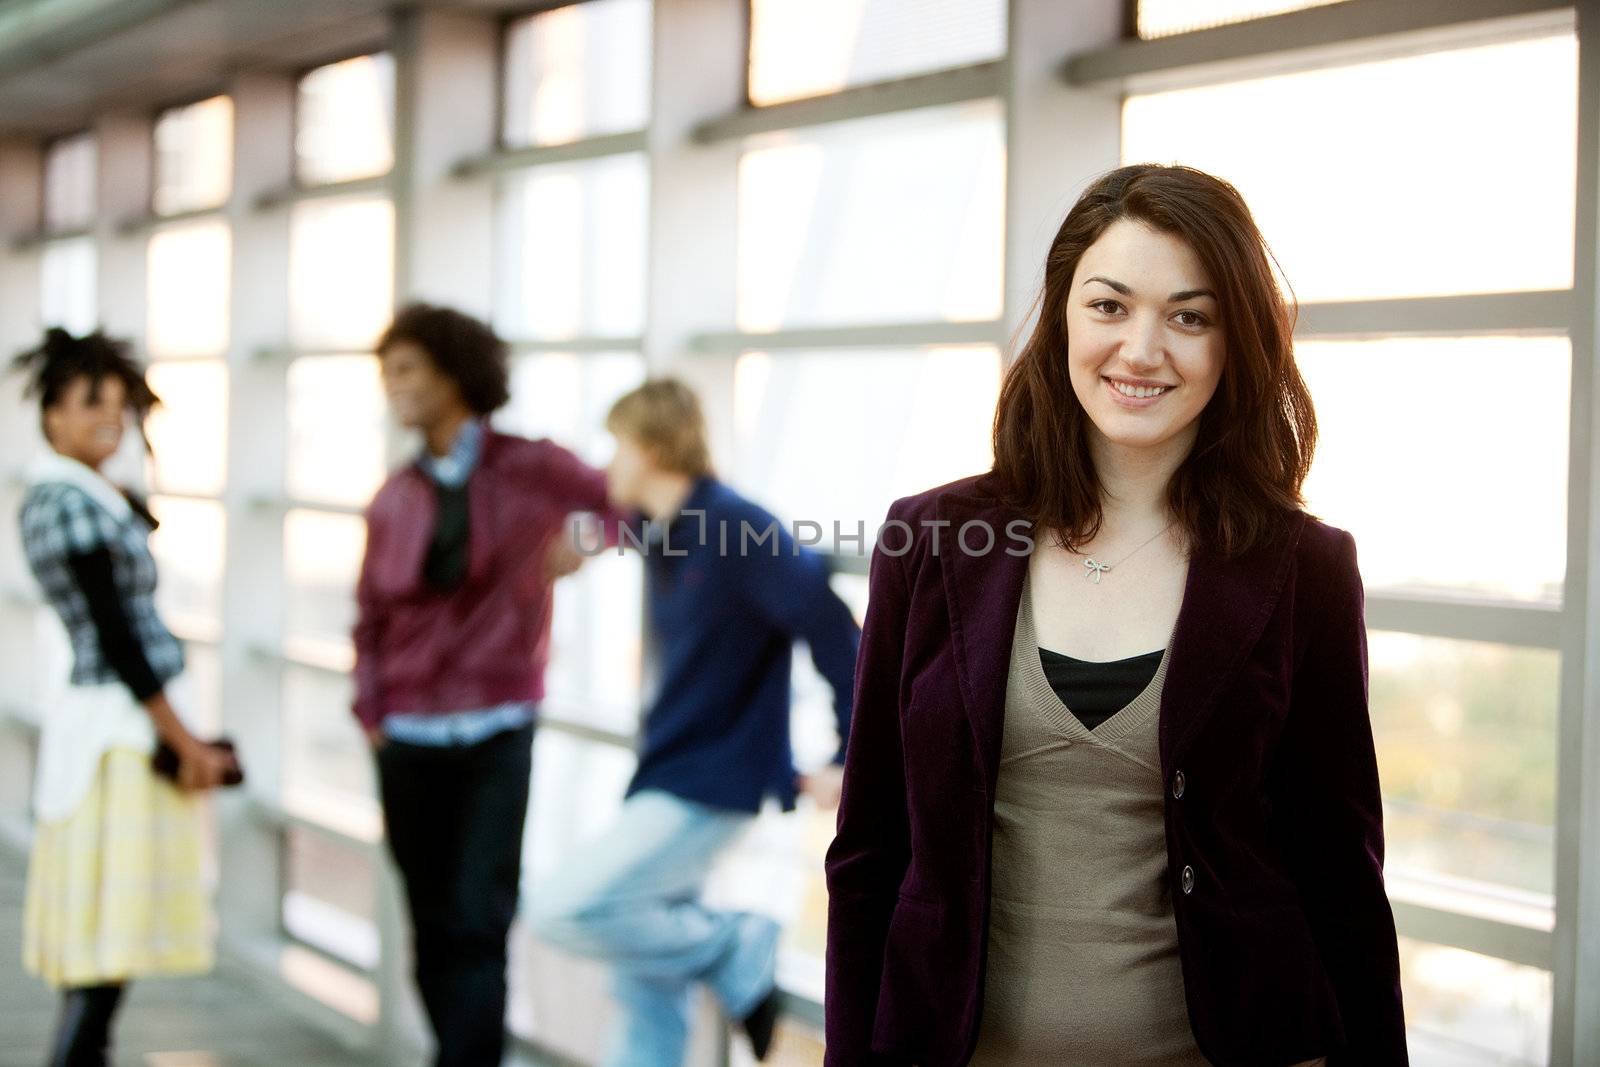 A portrait of a young woman with friends in the background